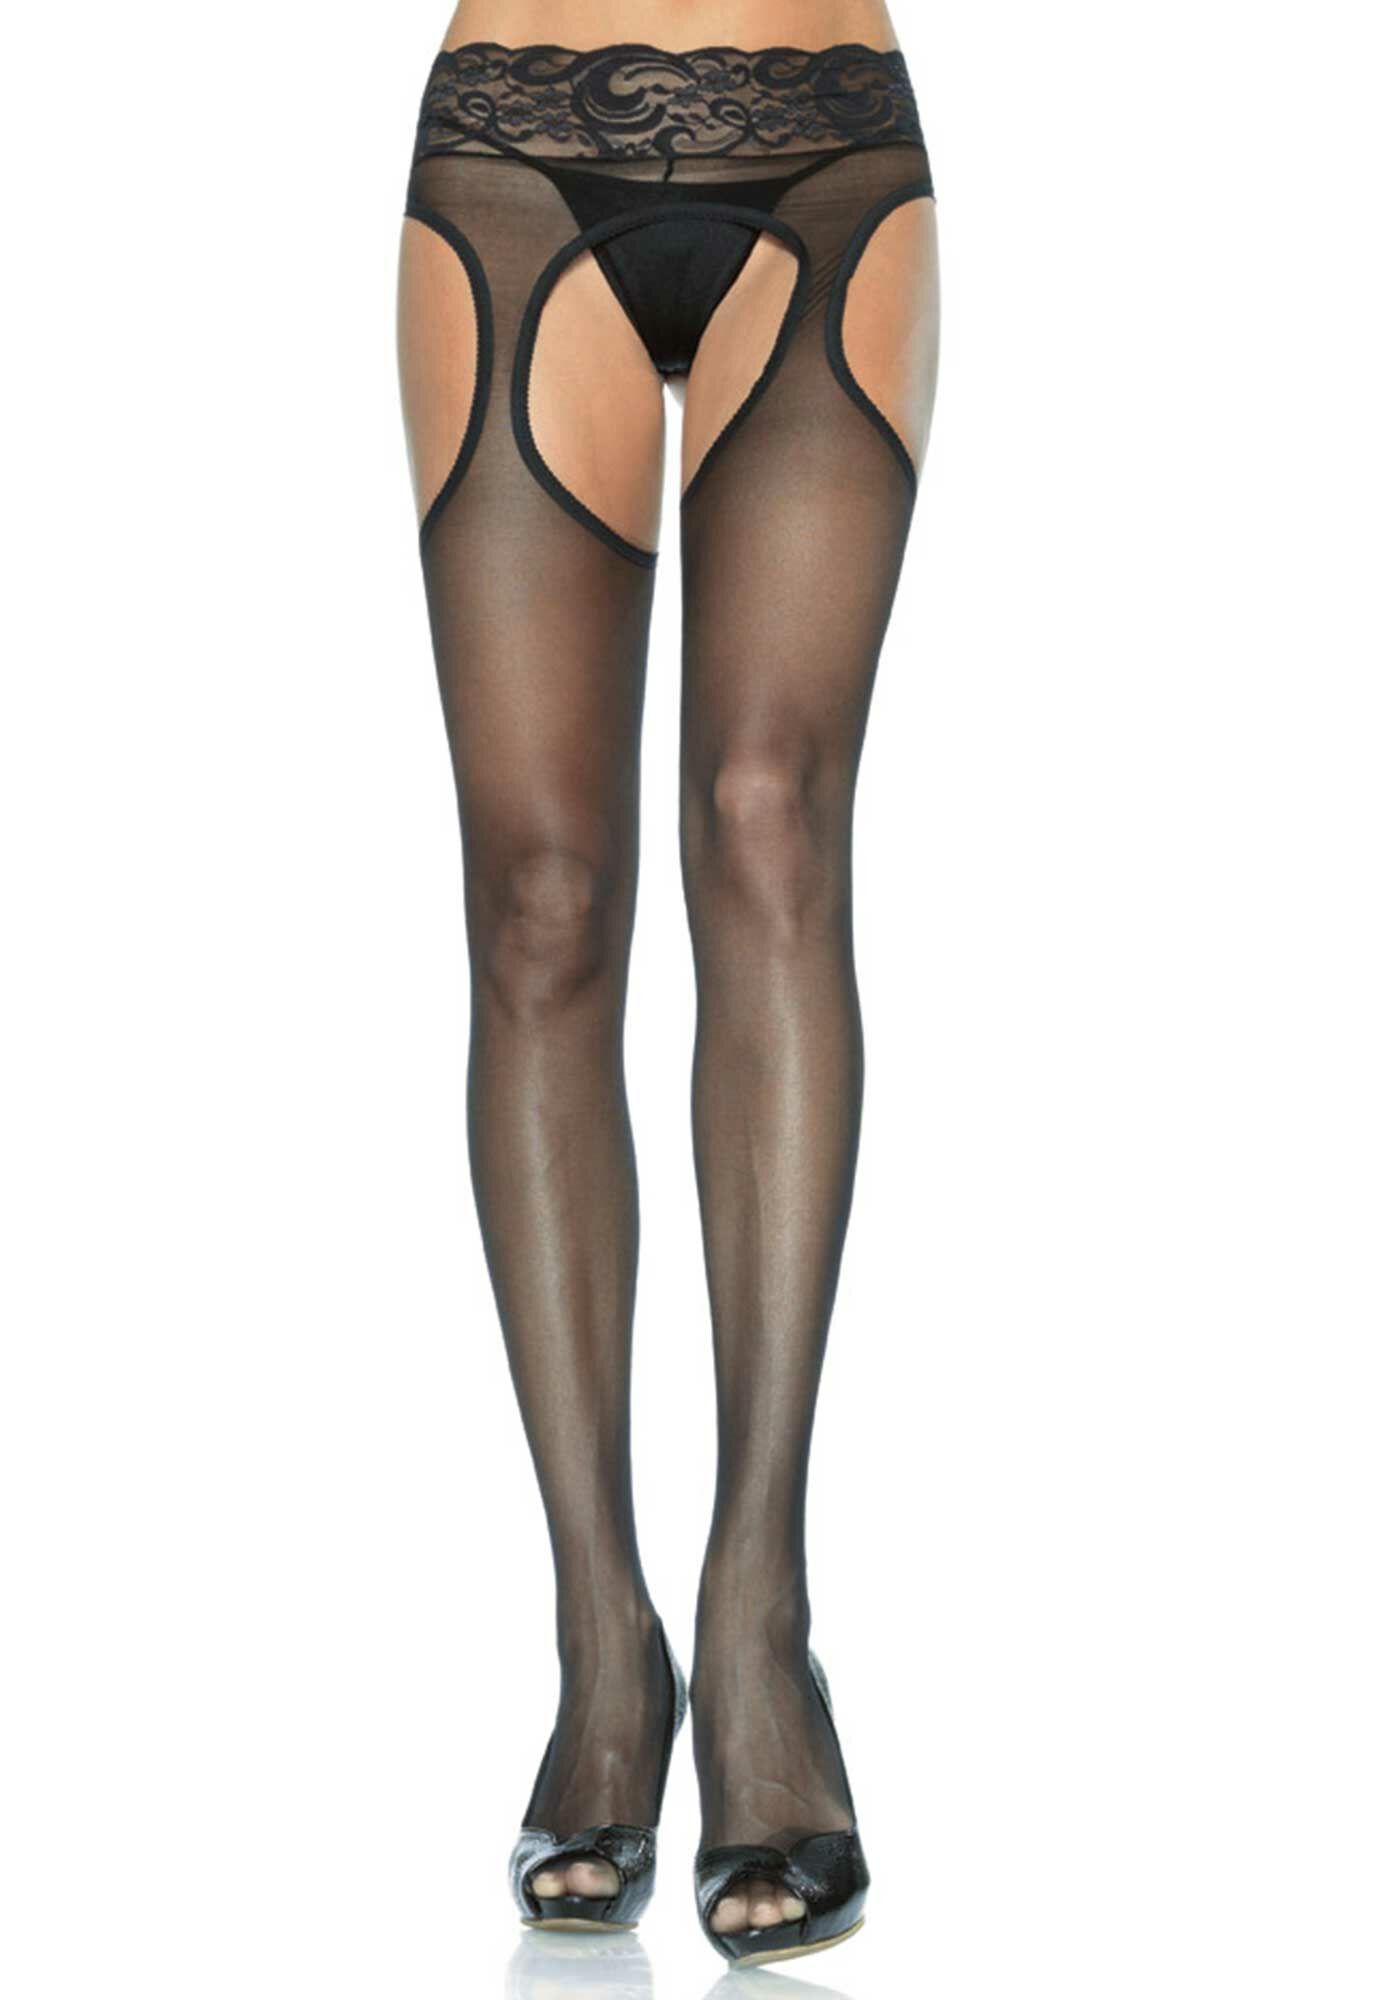 Sheer Black Suspender Tights with Lace Waist